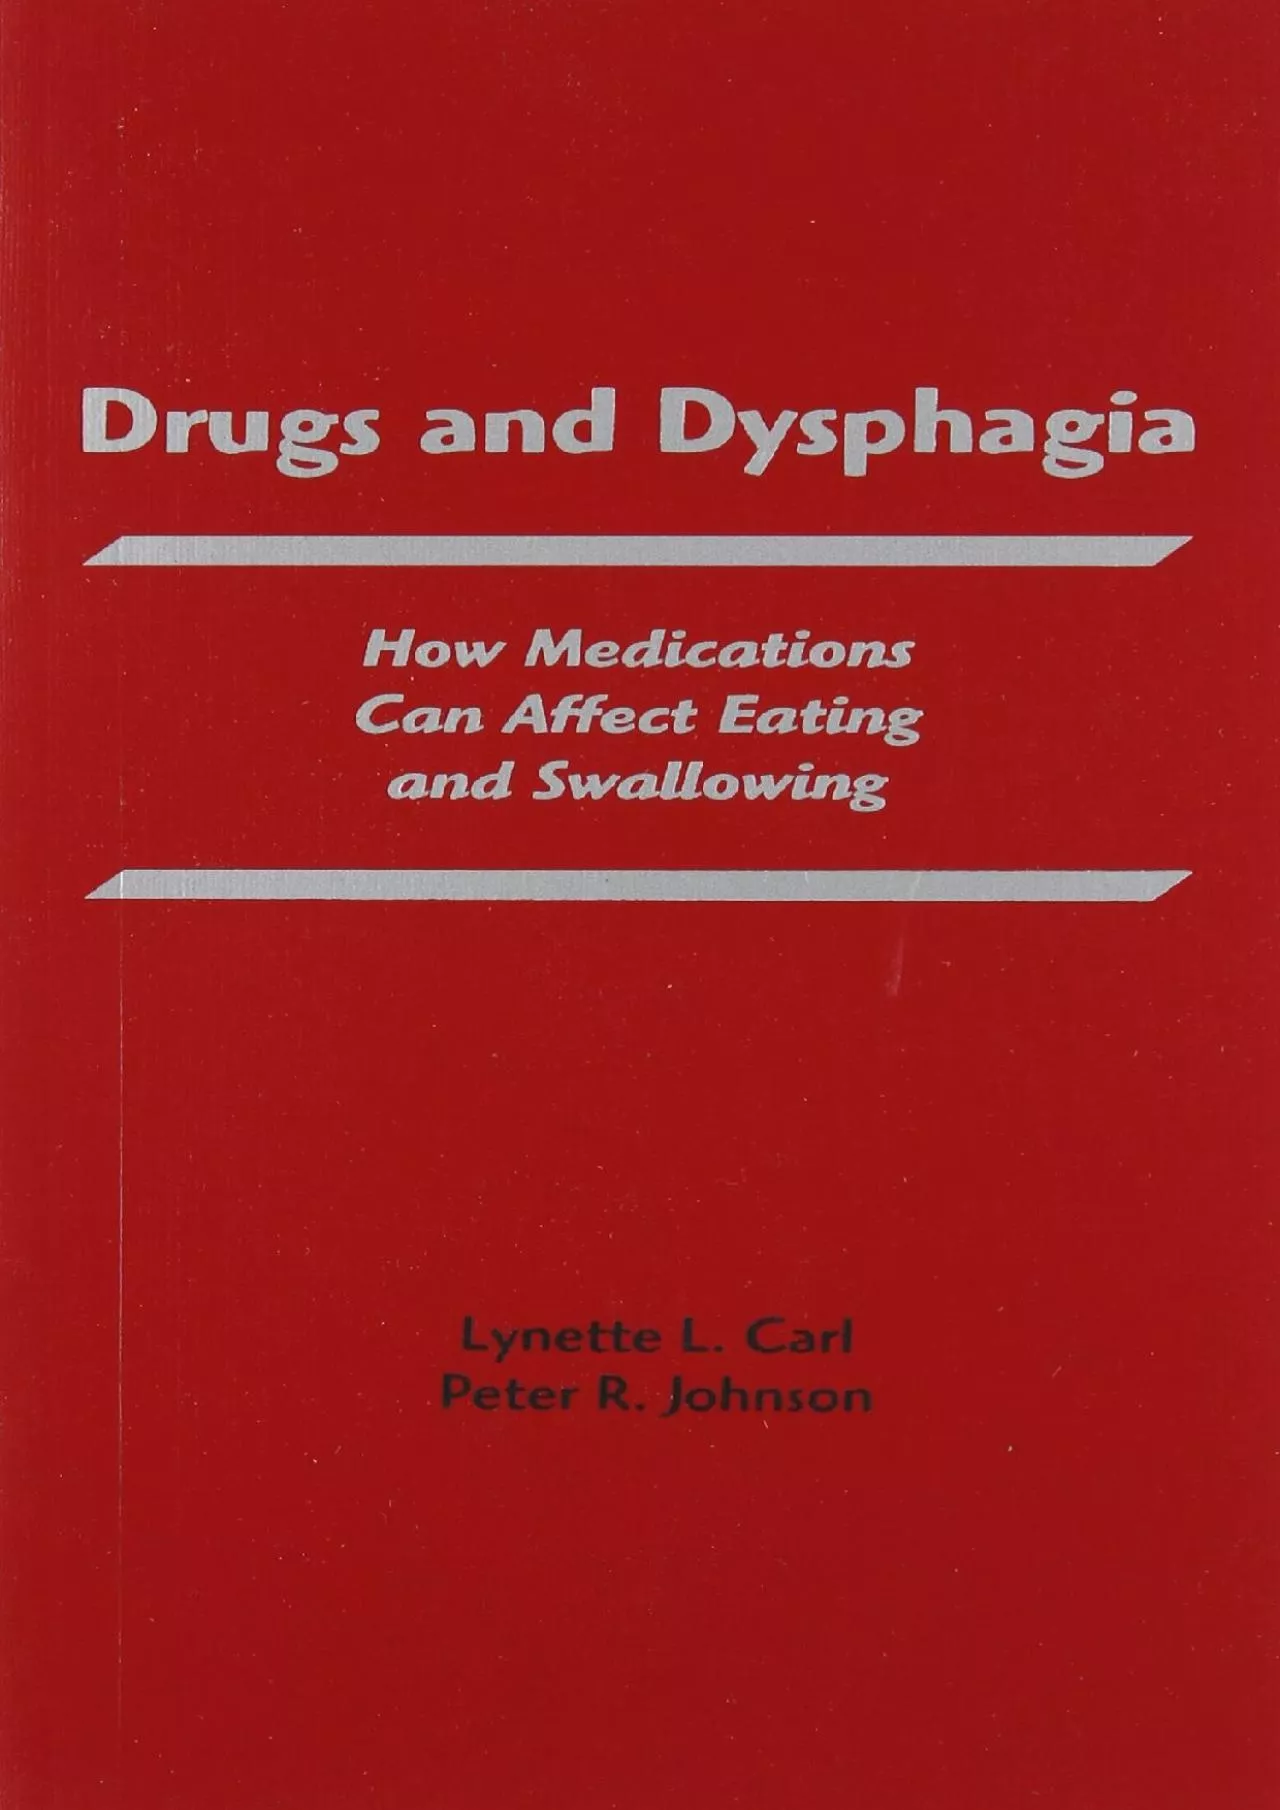 (DOWNLOAD)-Drugs and Dysphagia: How Medications Can Affect Eating and Swallowing (Carl,